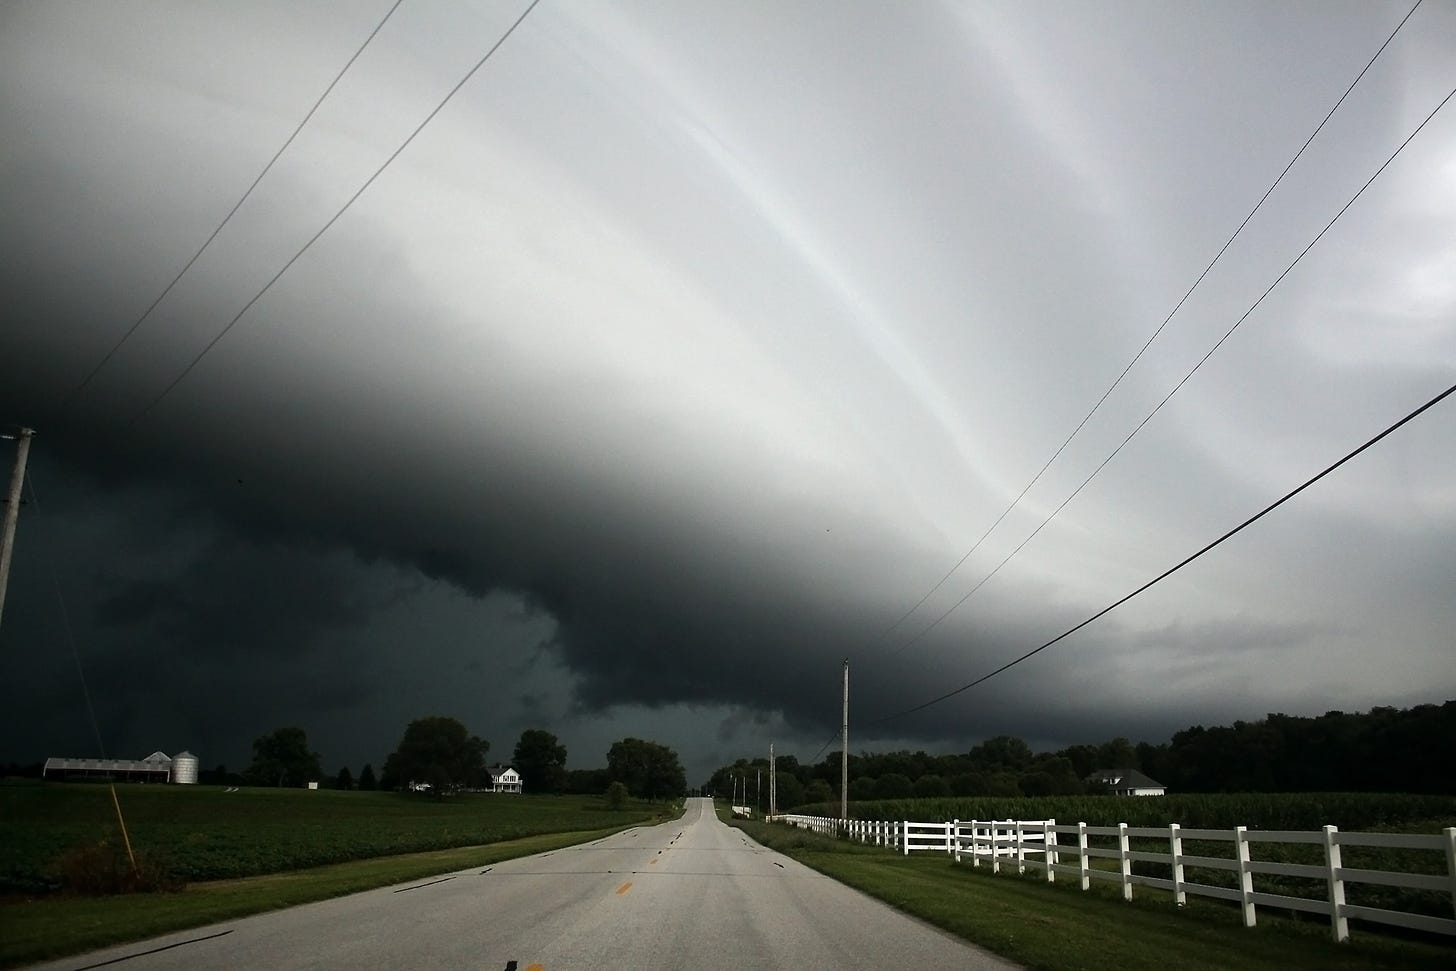 A massive shelf clouds rolls across Henry County, ushering in late summer thunderstorms. The darker clouds, which can be seen below the main cloud, occasionally threatened to swirl into funnel clouds, but eventually dissipated.